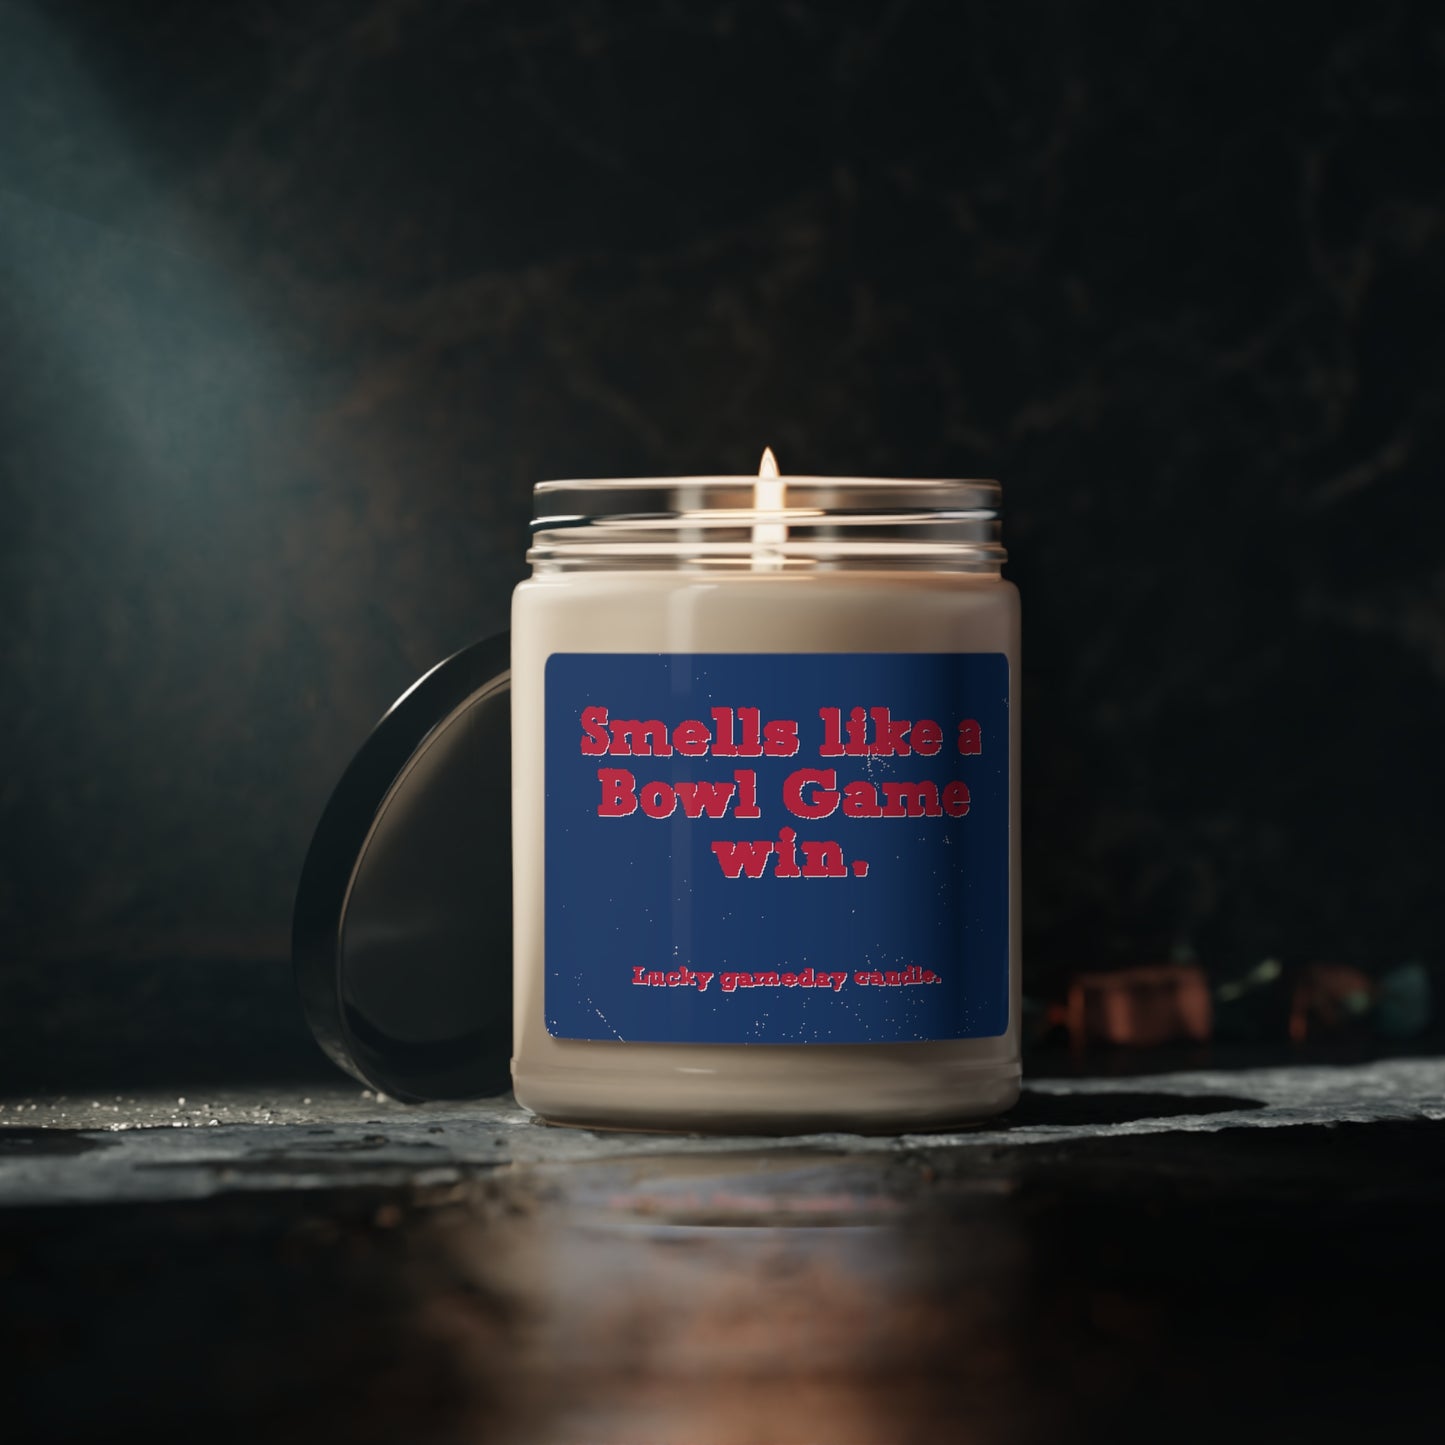 Arizona - "Smells Like a Bowl Game Win" Scented Candle